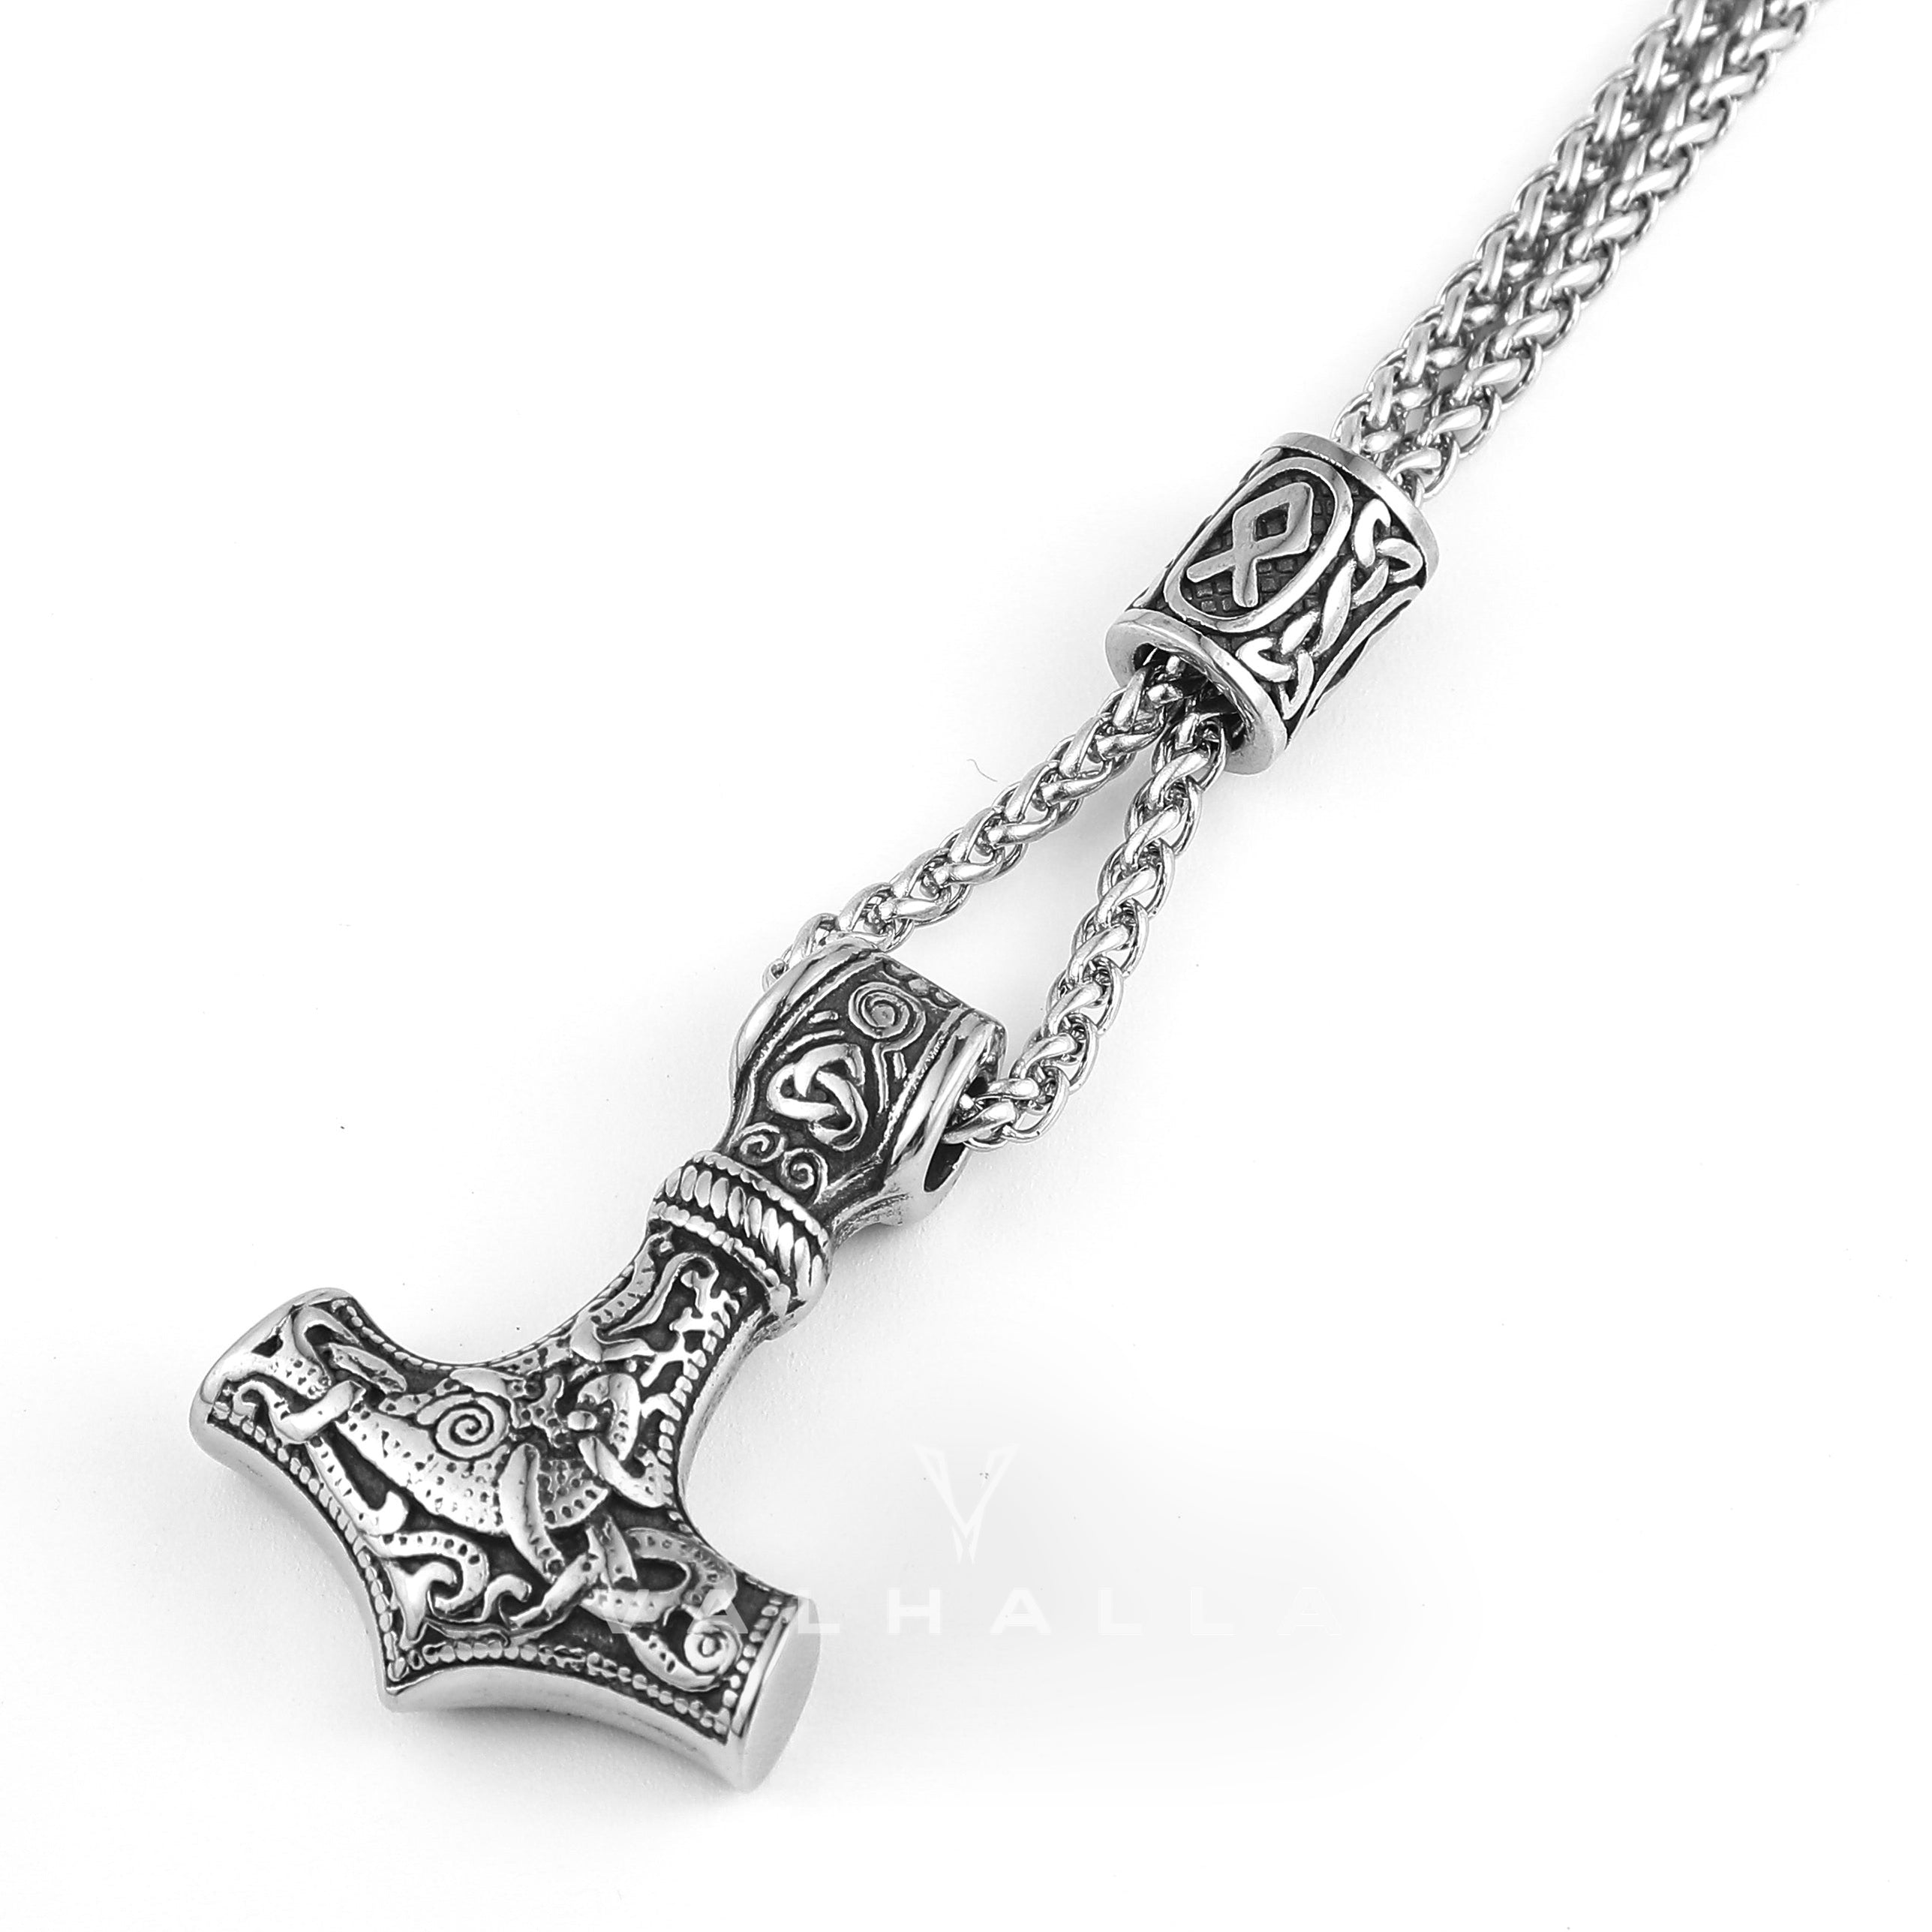 Handcrafted Stainless Steel Mjolnir and Othala Pendant & Chain